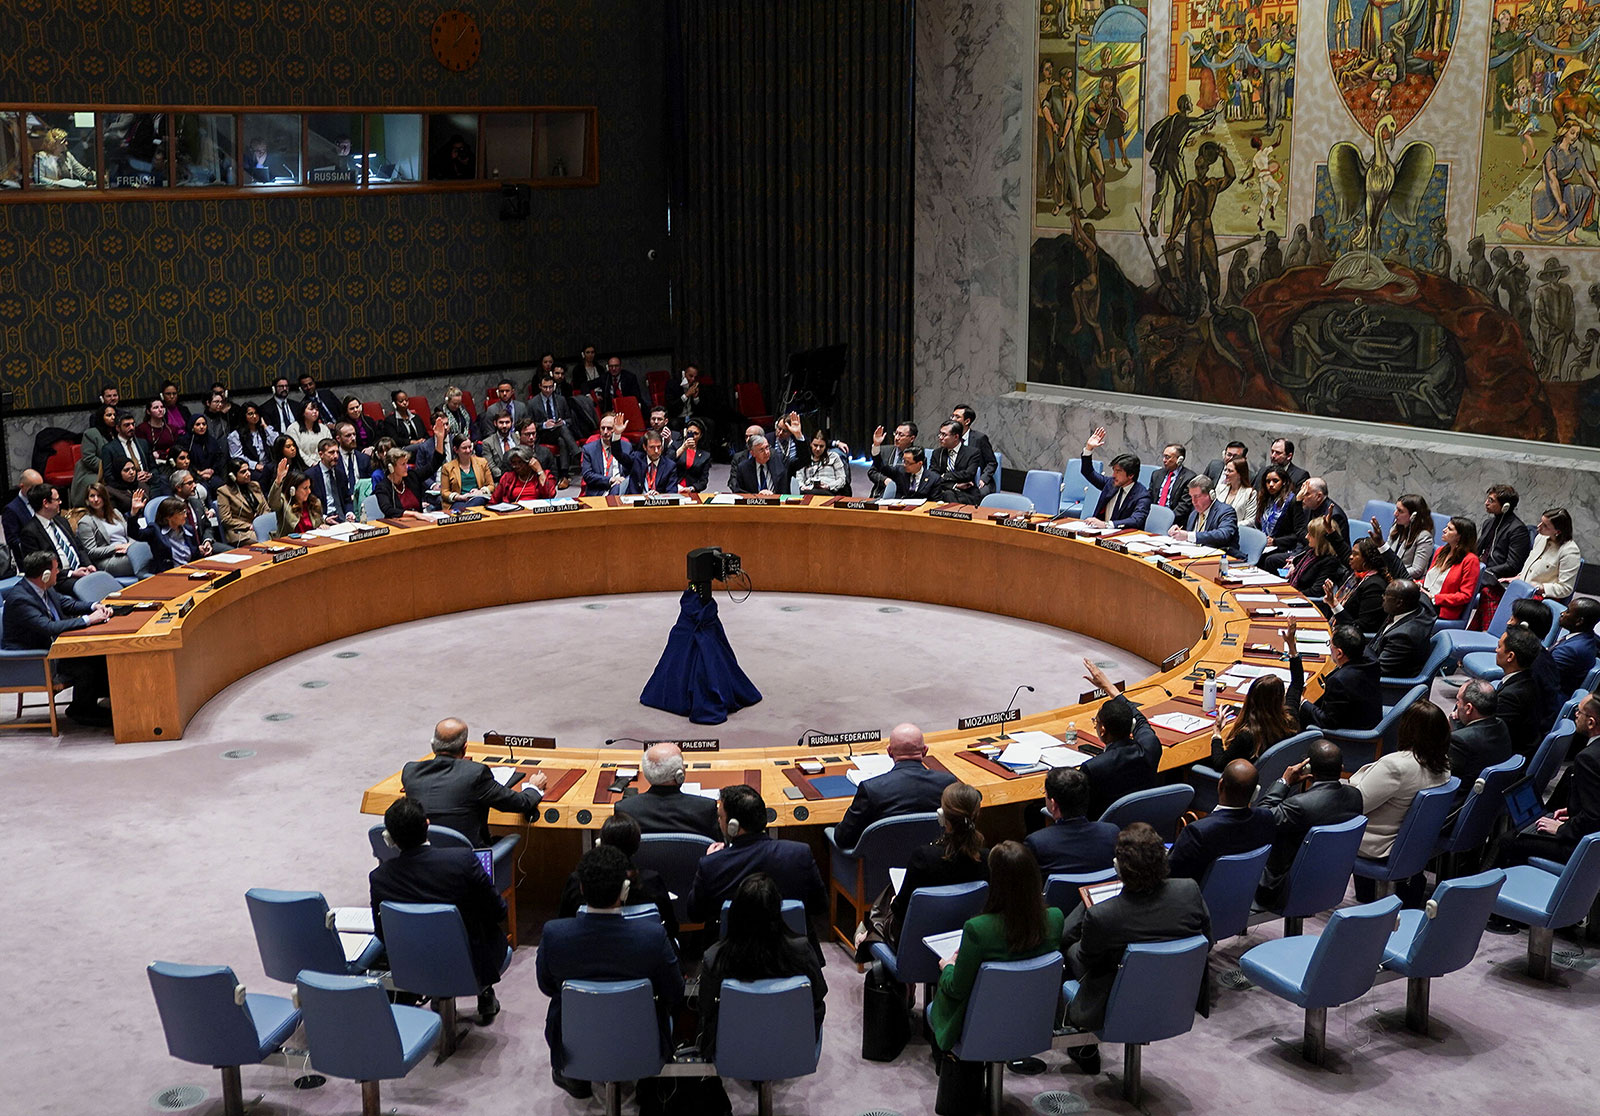 Members of the United Nations Security Council vote on a resolution calling for pauses in fighting between Israel and Hamas in order to establish humanitarian corridors throughout Gaza during a meeting at UN headquarters in New York on Friday.